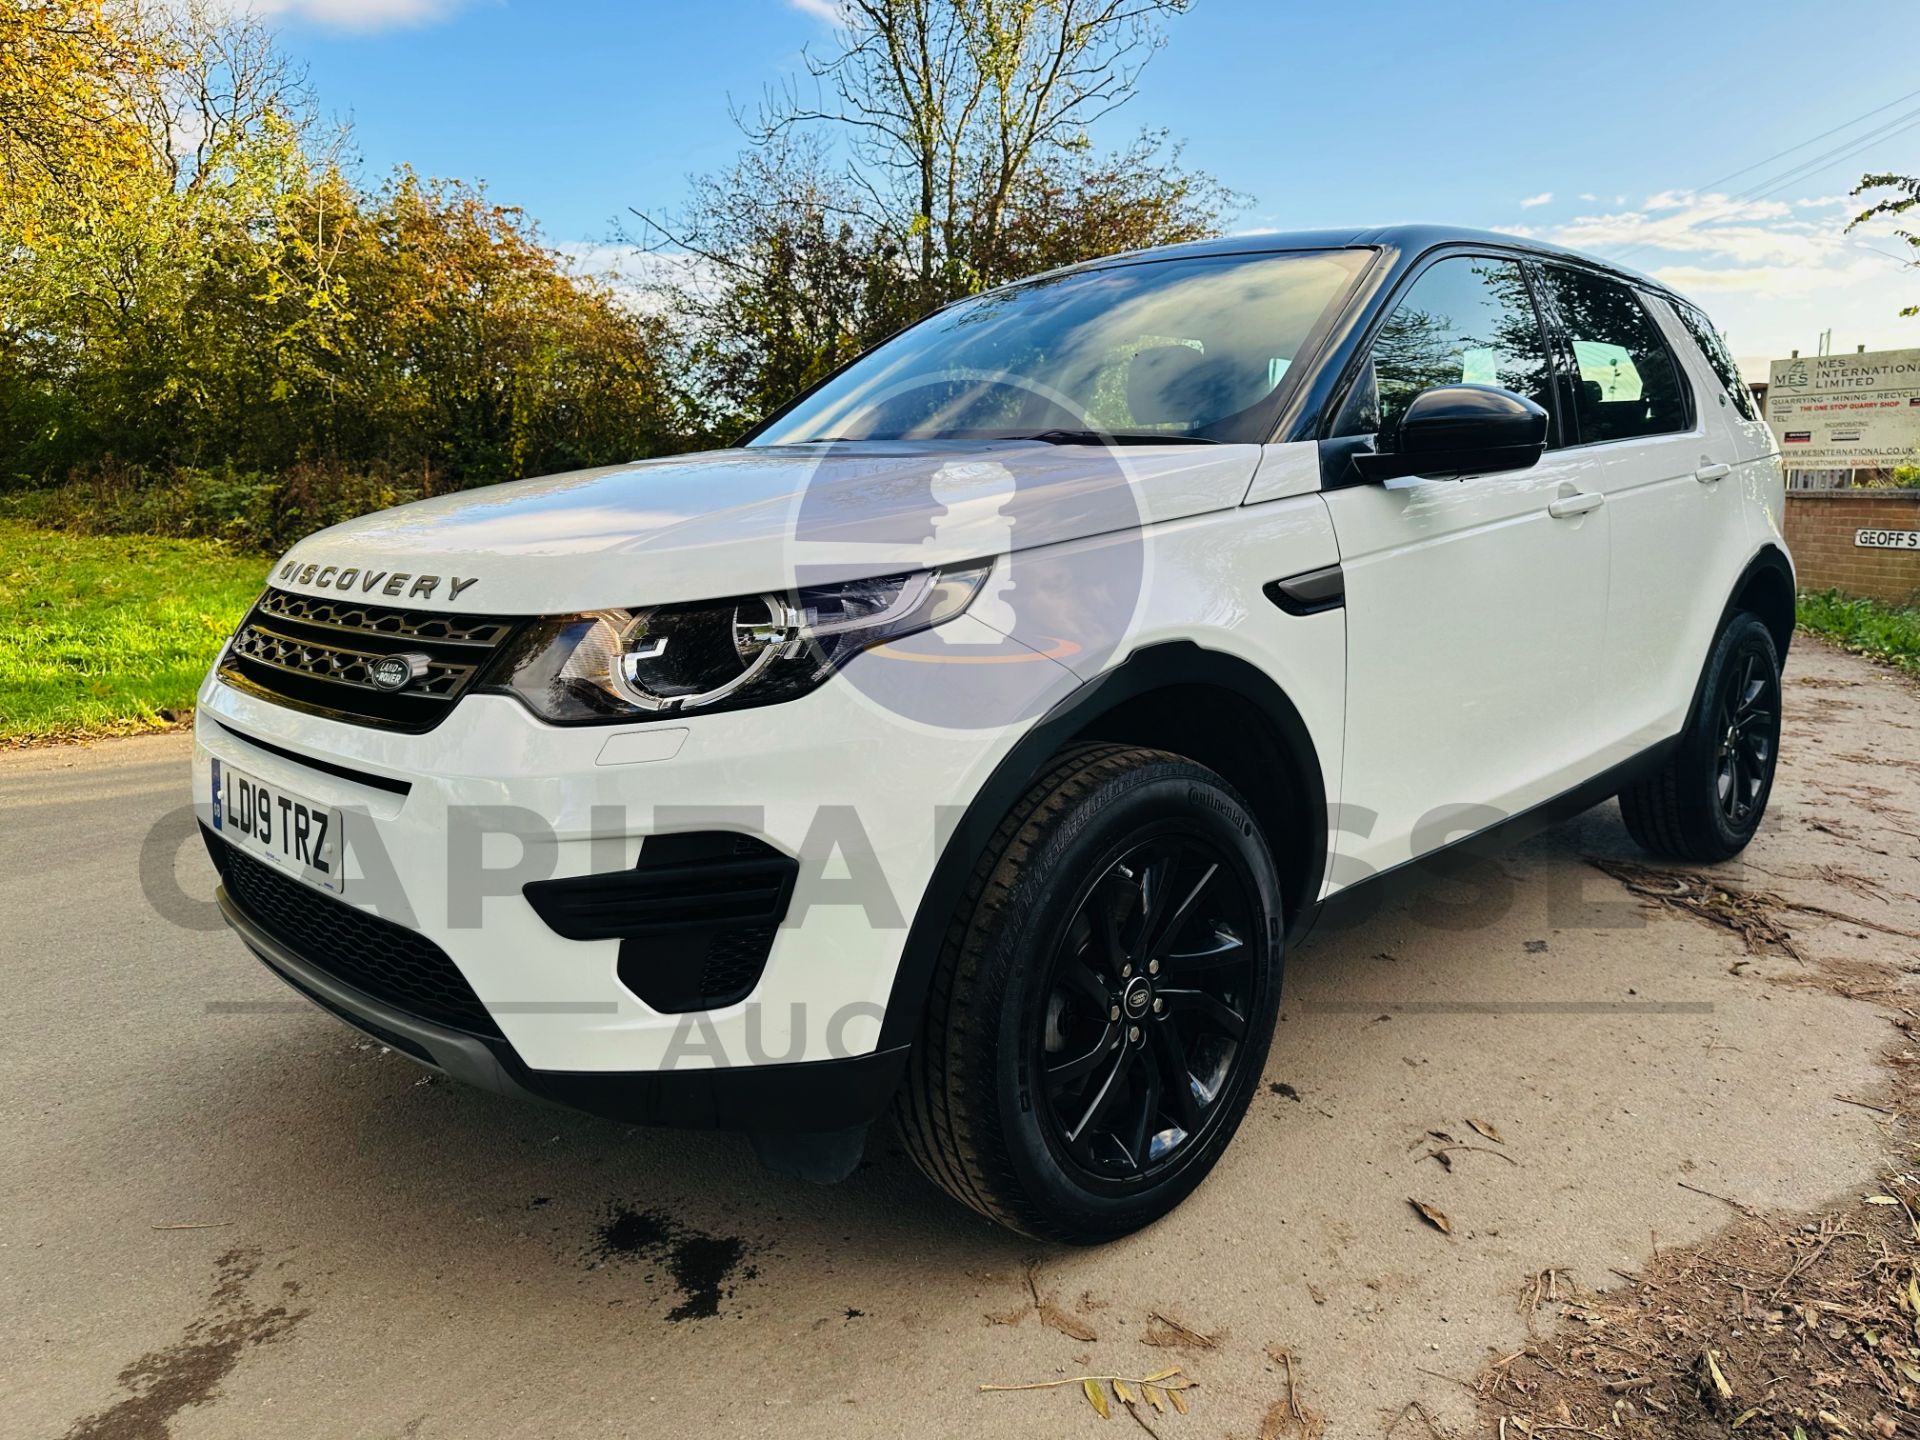 (On Sale) LAND ROVER DISCOVERY SPORT *SE* 5 DOOR SUV (2019 - EURO 6) 2.0 ED4 - AUTO STOP/START - Image 6 of 38